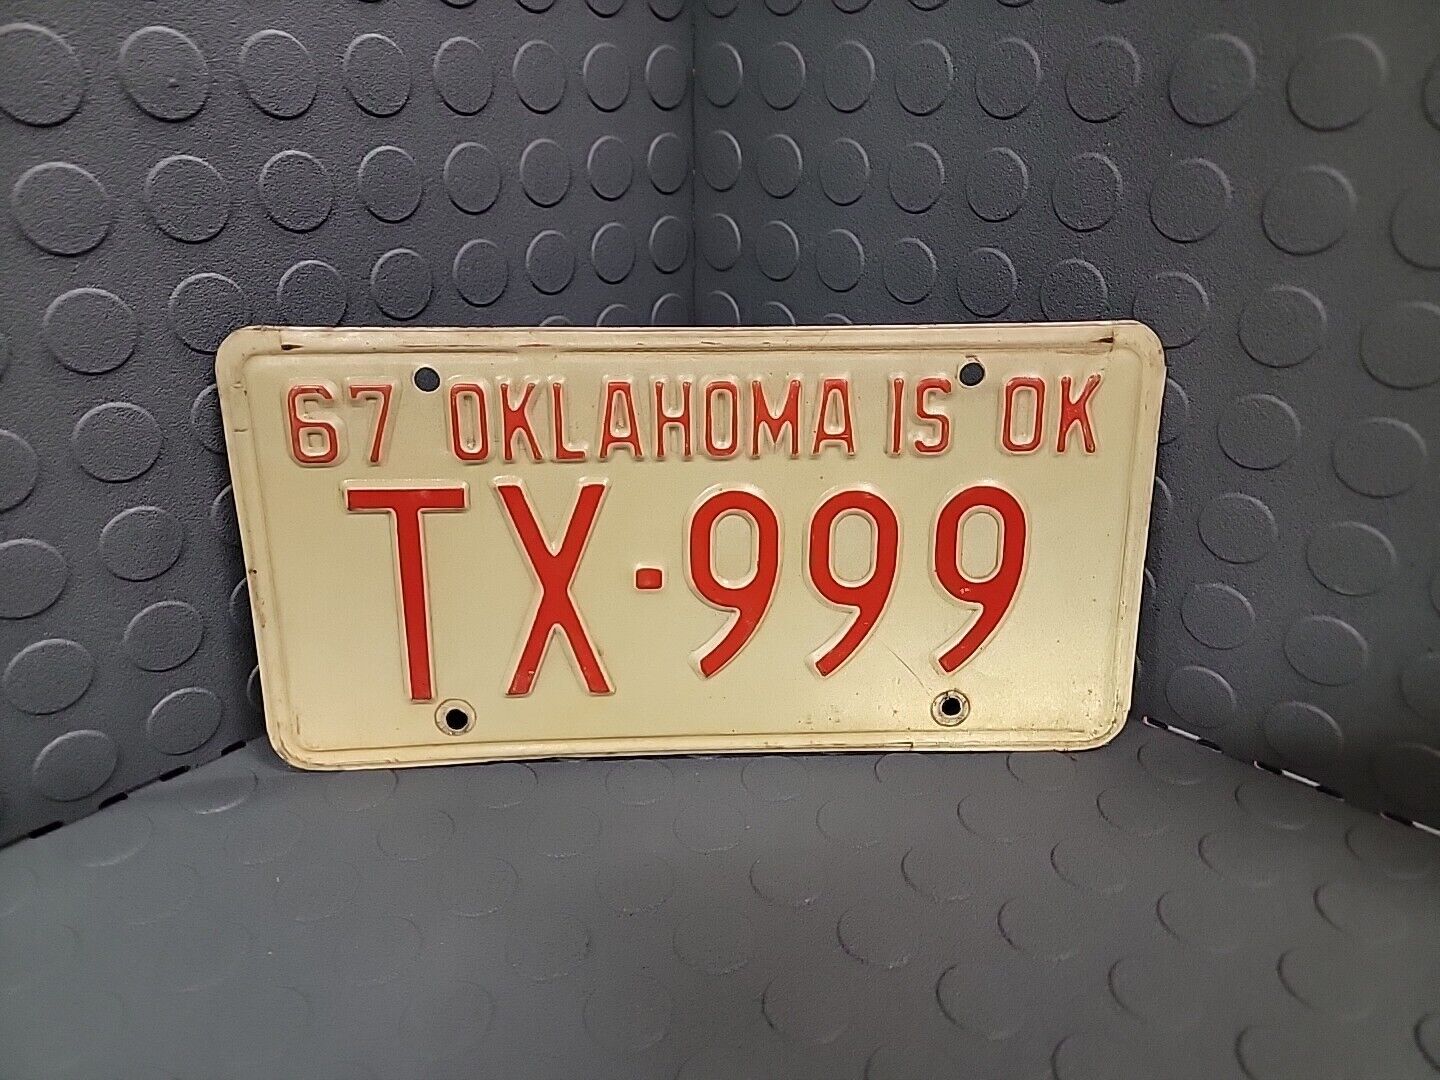 1967 OKLAHOMA IS OK LICENSE PLATE TX 999 CHEVY DODGE FORD VINTAGE 67 68 69 66 65